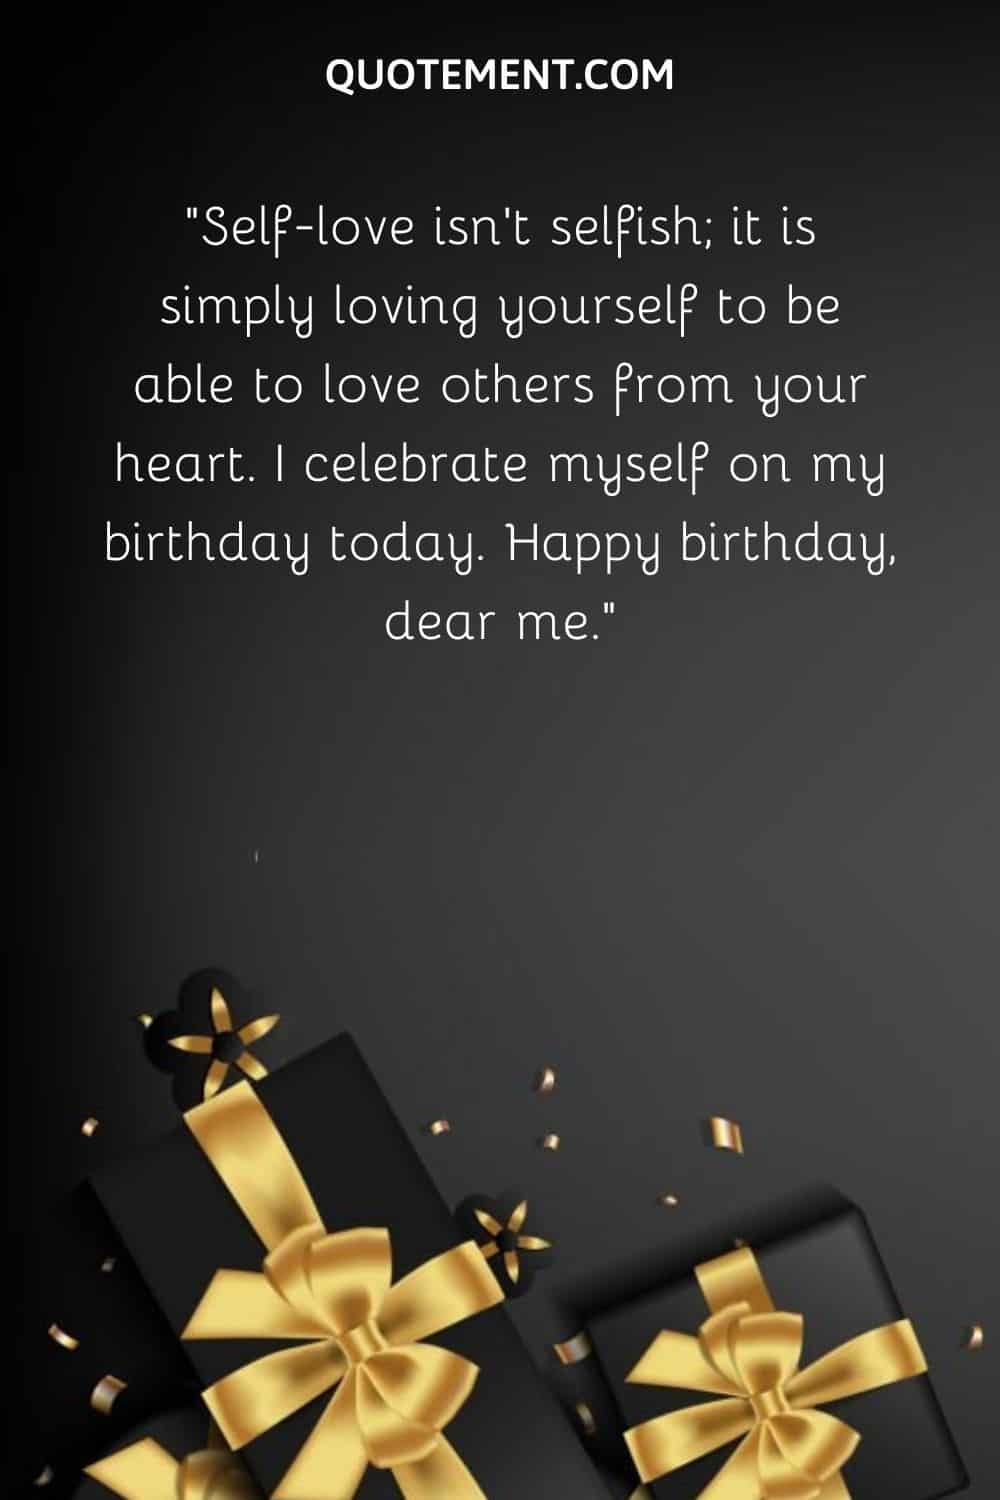 120 Awesome Happy 34th Birthday Quotes And Wishes